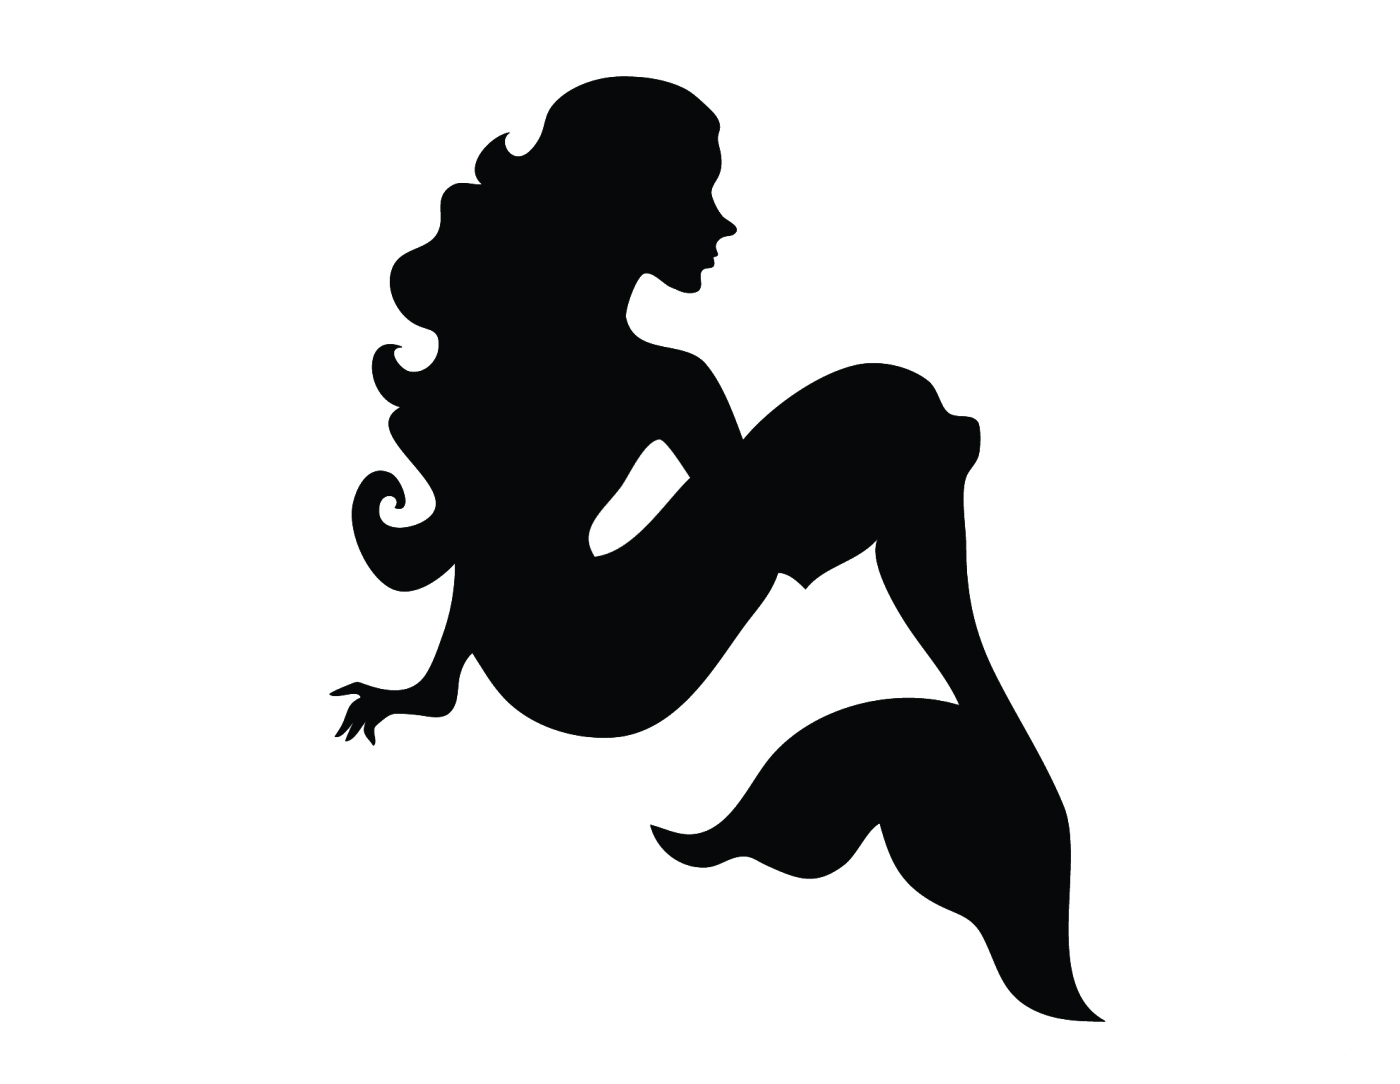 Mermaid clip art free download clipart images 2 2